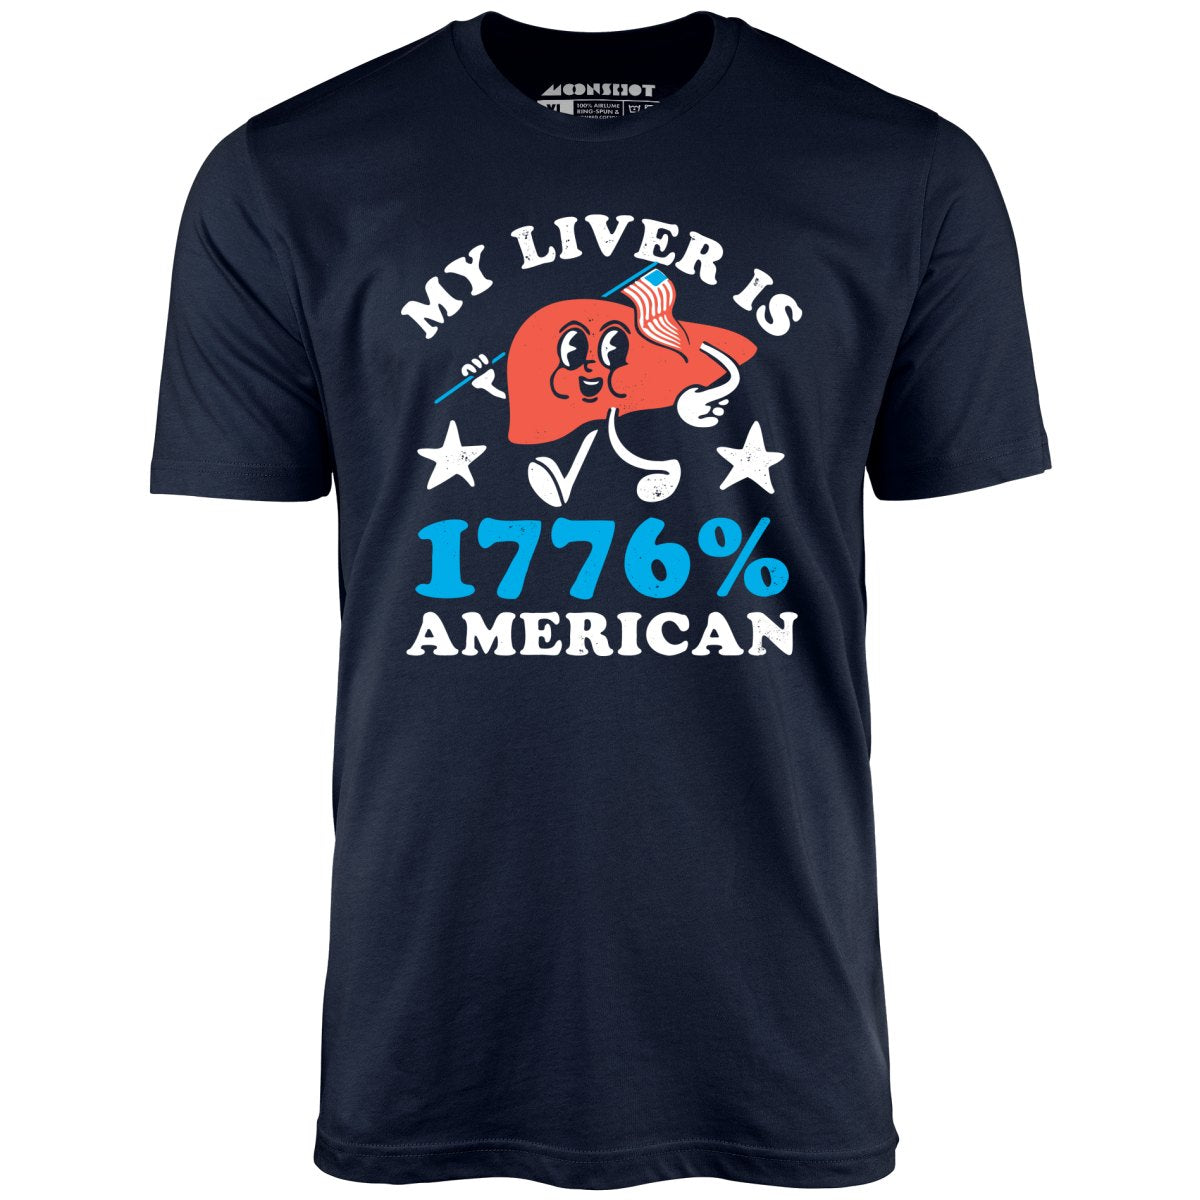 My Liver is 1776 Percent American - Unisex T-Shirt